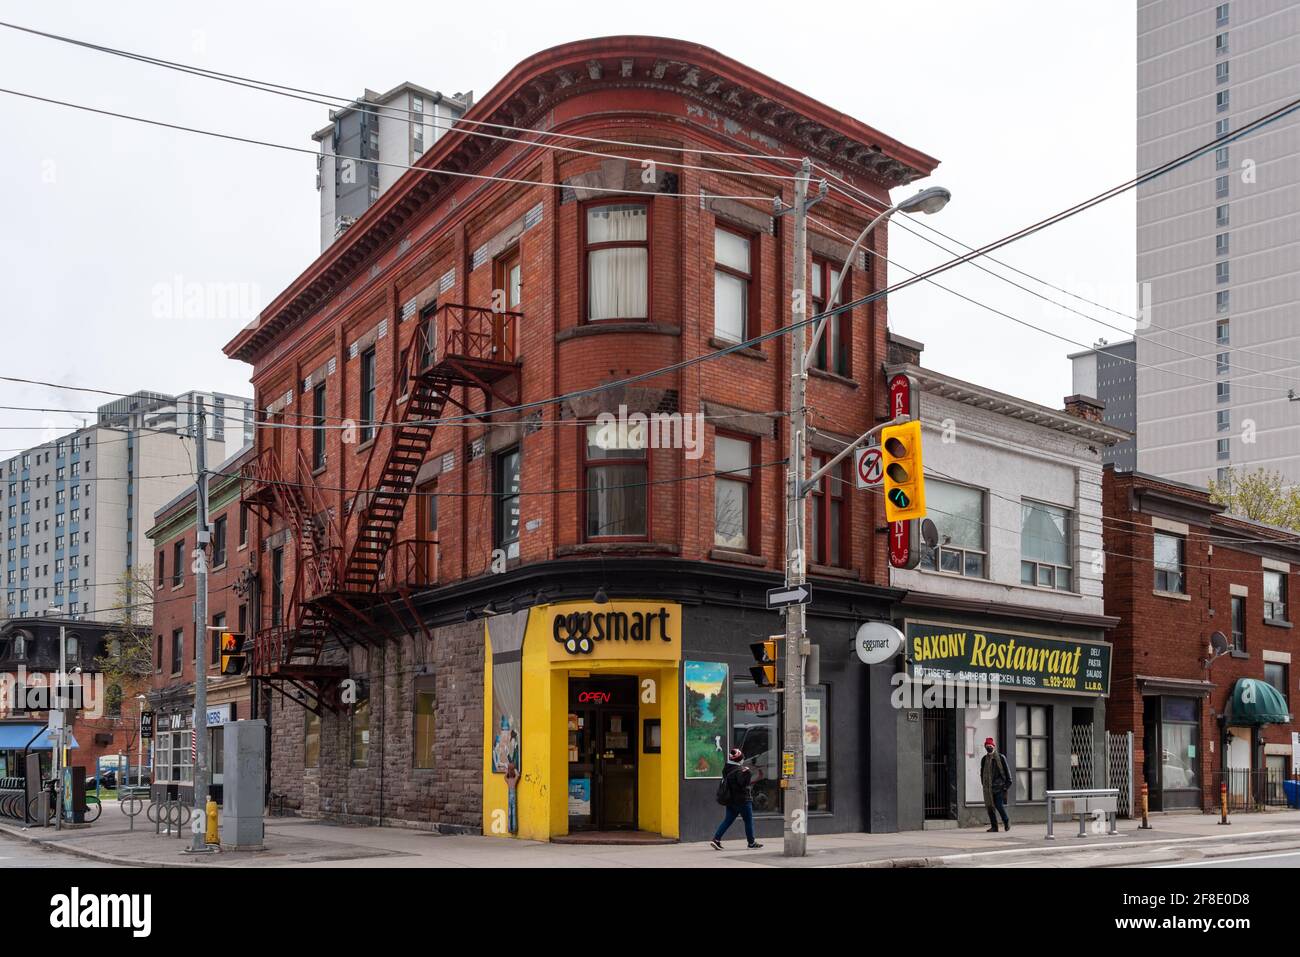 Colonial style architecture buildings in the vicinity of Bloor and Sherbourne Street intersection in Toronto, Canada Stock Photo